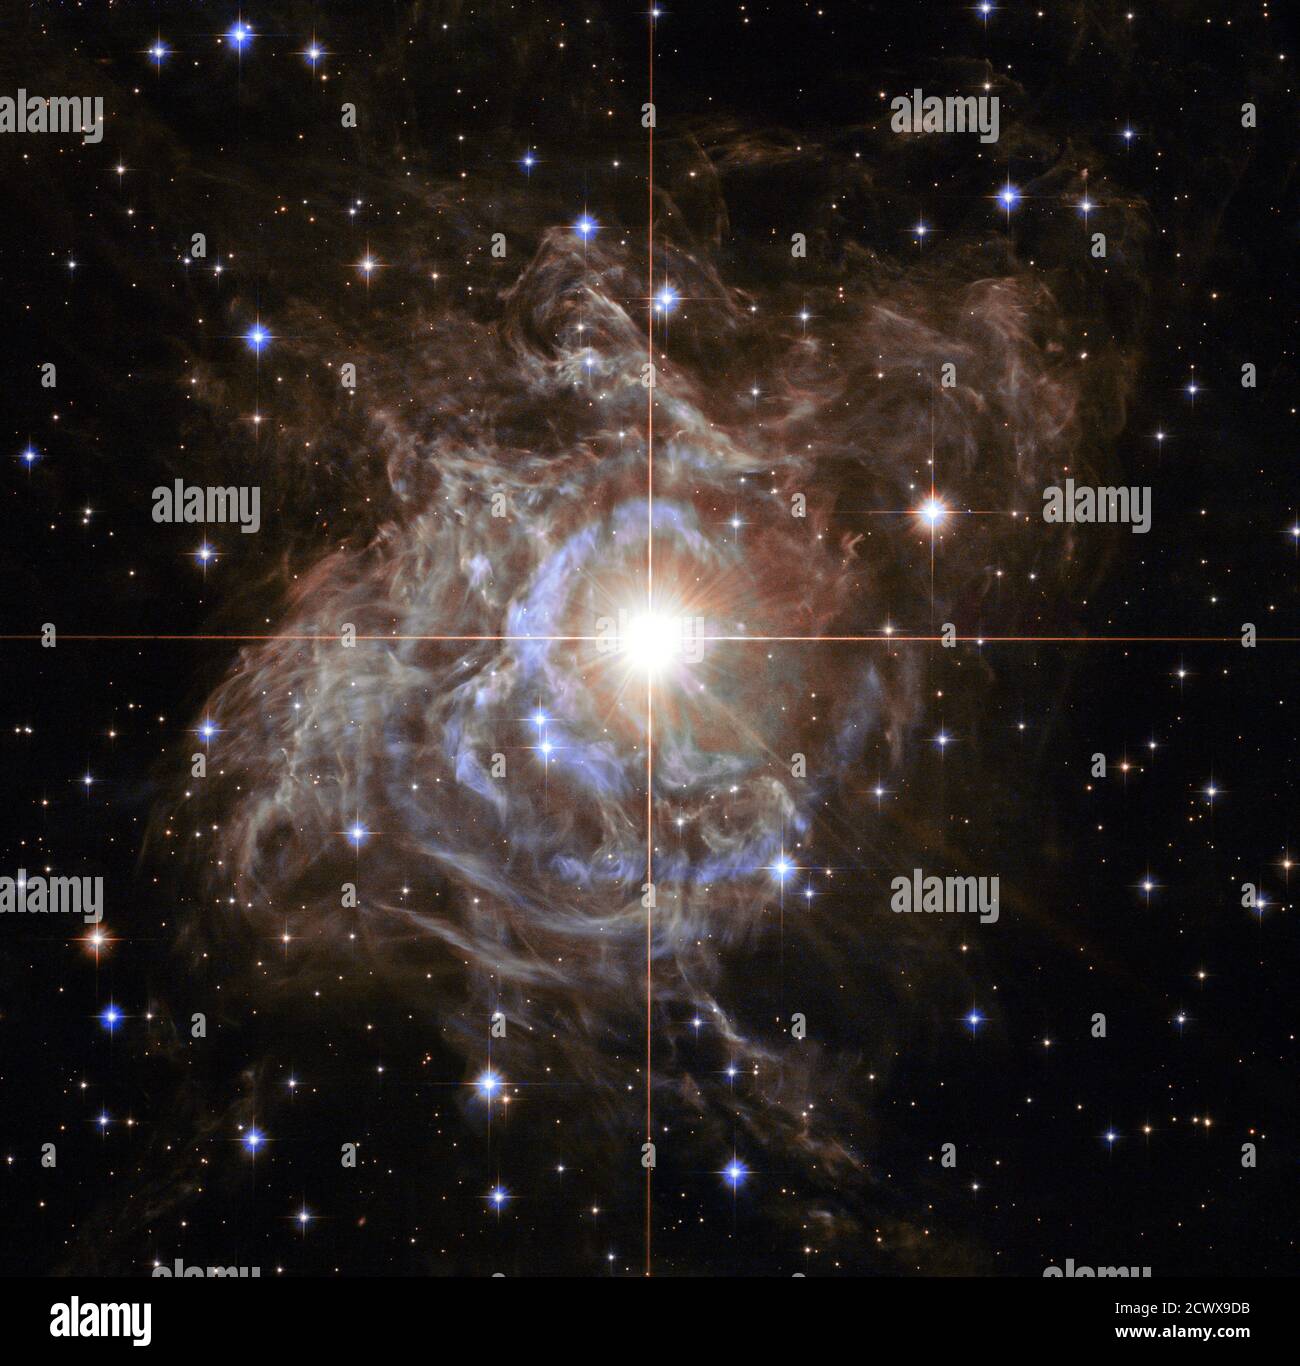 Hubble’s Cosmic Holiday Wreath Like a bright ornament in a holiday wreath, this bright star decorates its surrounding nebula with waves of light. This image from NASA's Hubble Space Telescope shows RS Puppis, a Cepheid variable star which rhythmically brightens and dims over a six-week cycle. Its average intrinsic brightness is 15,000 times greater than the Sun's luminosity.  The nebula flickers in brightness as pulses of light from the Cepheid propagate outwards. Hubble took a series of photos of light flashes rippling across the nebula in a phenomenon known as a 'light echo.' Even though lig Stock Photo